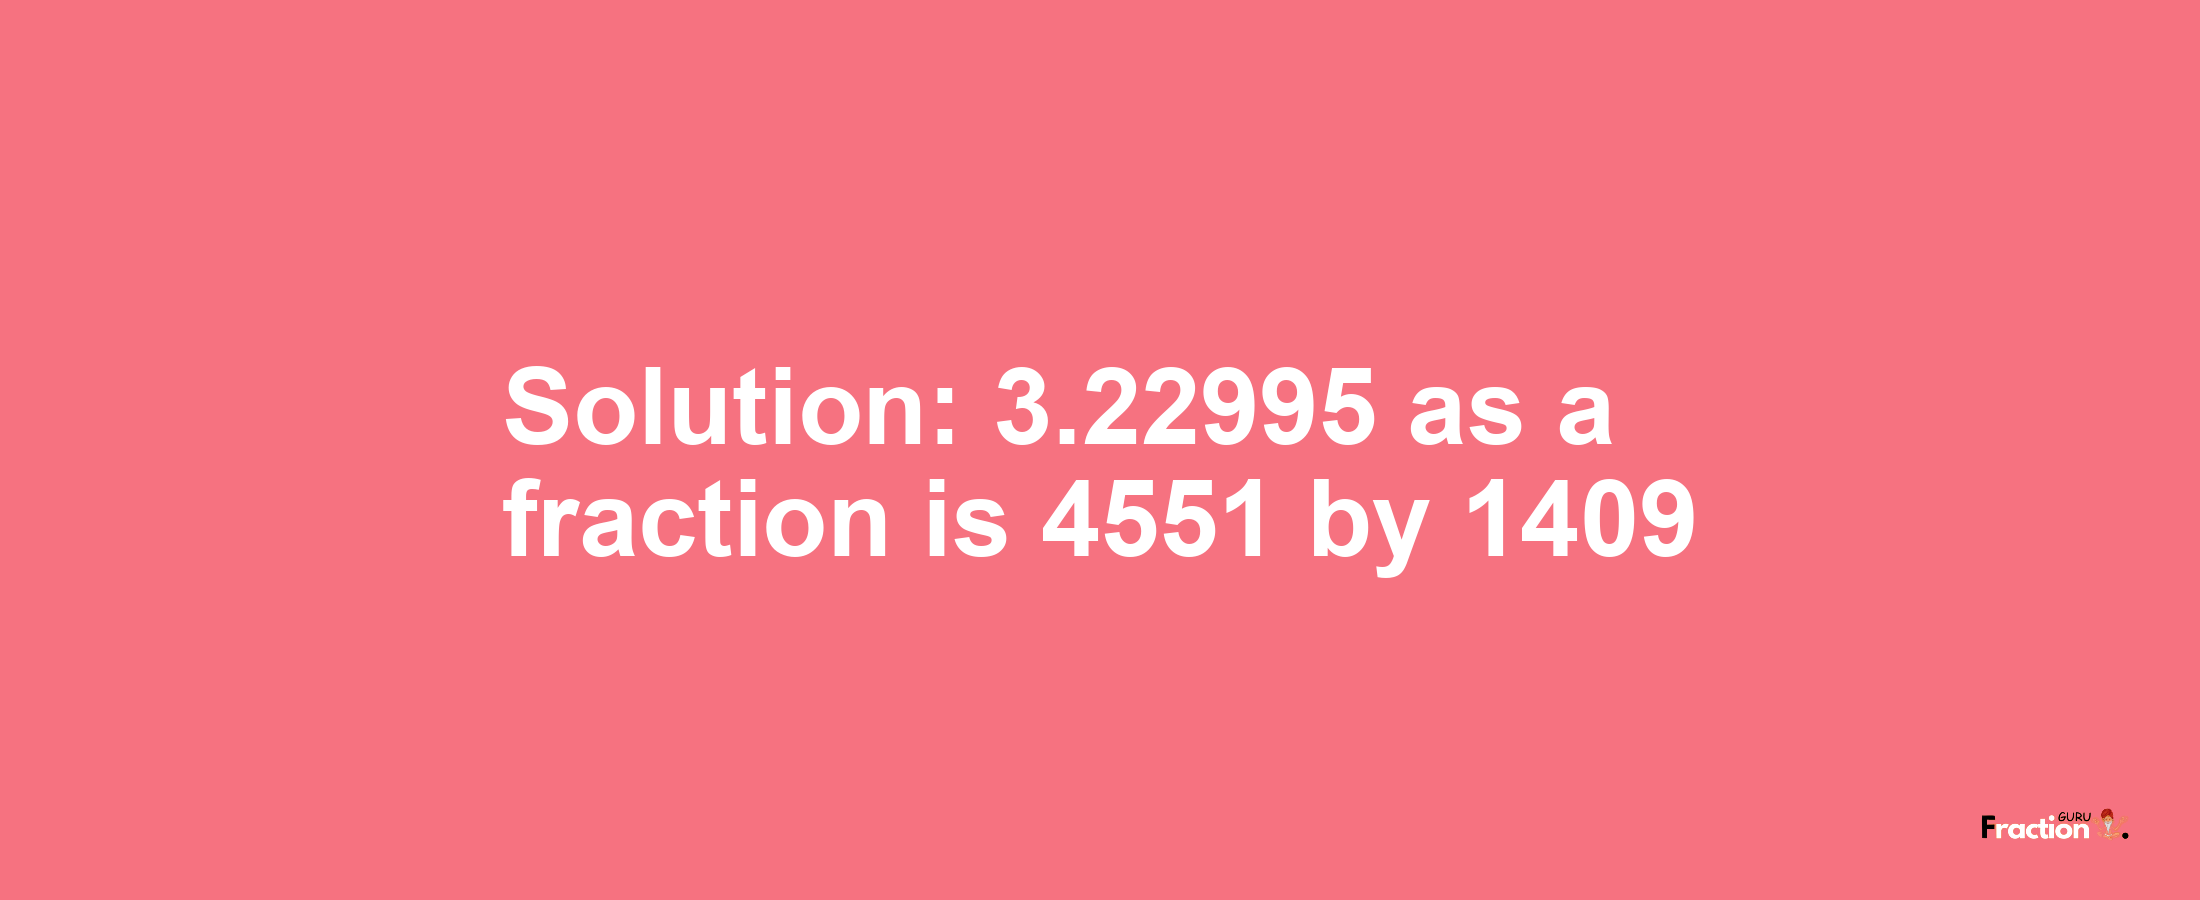 Solution:3.22995 as a fraction is 4551/1409